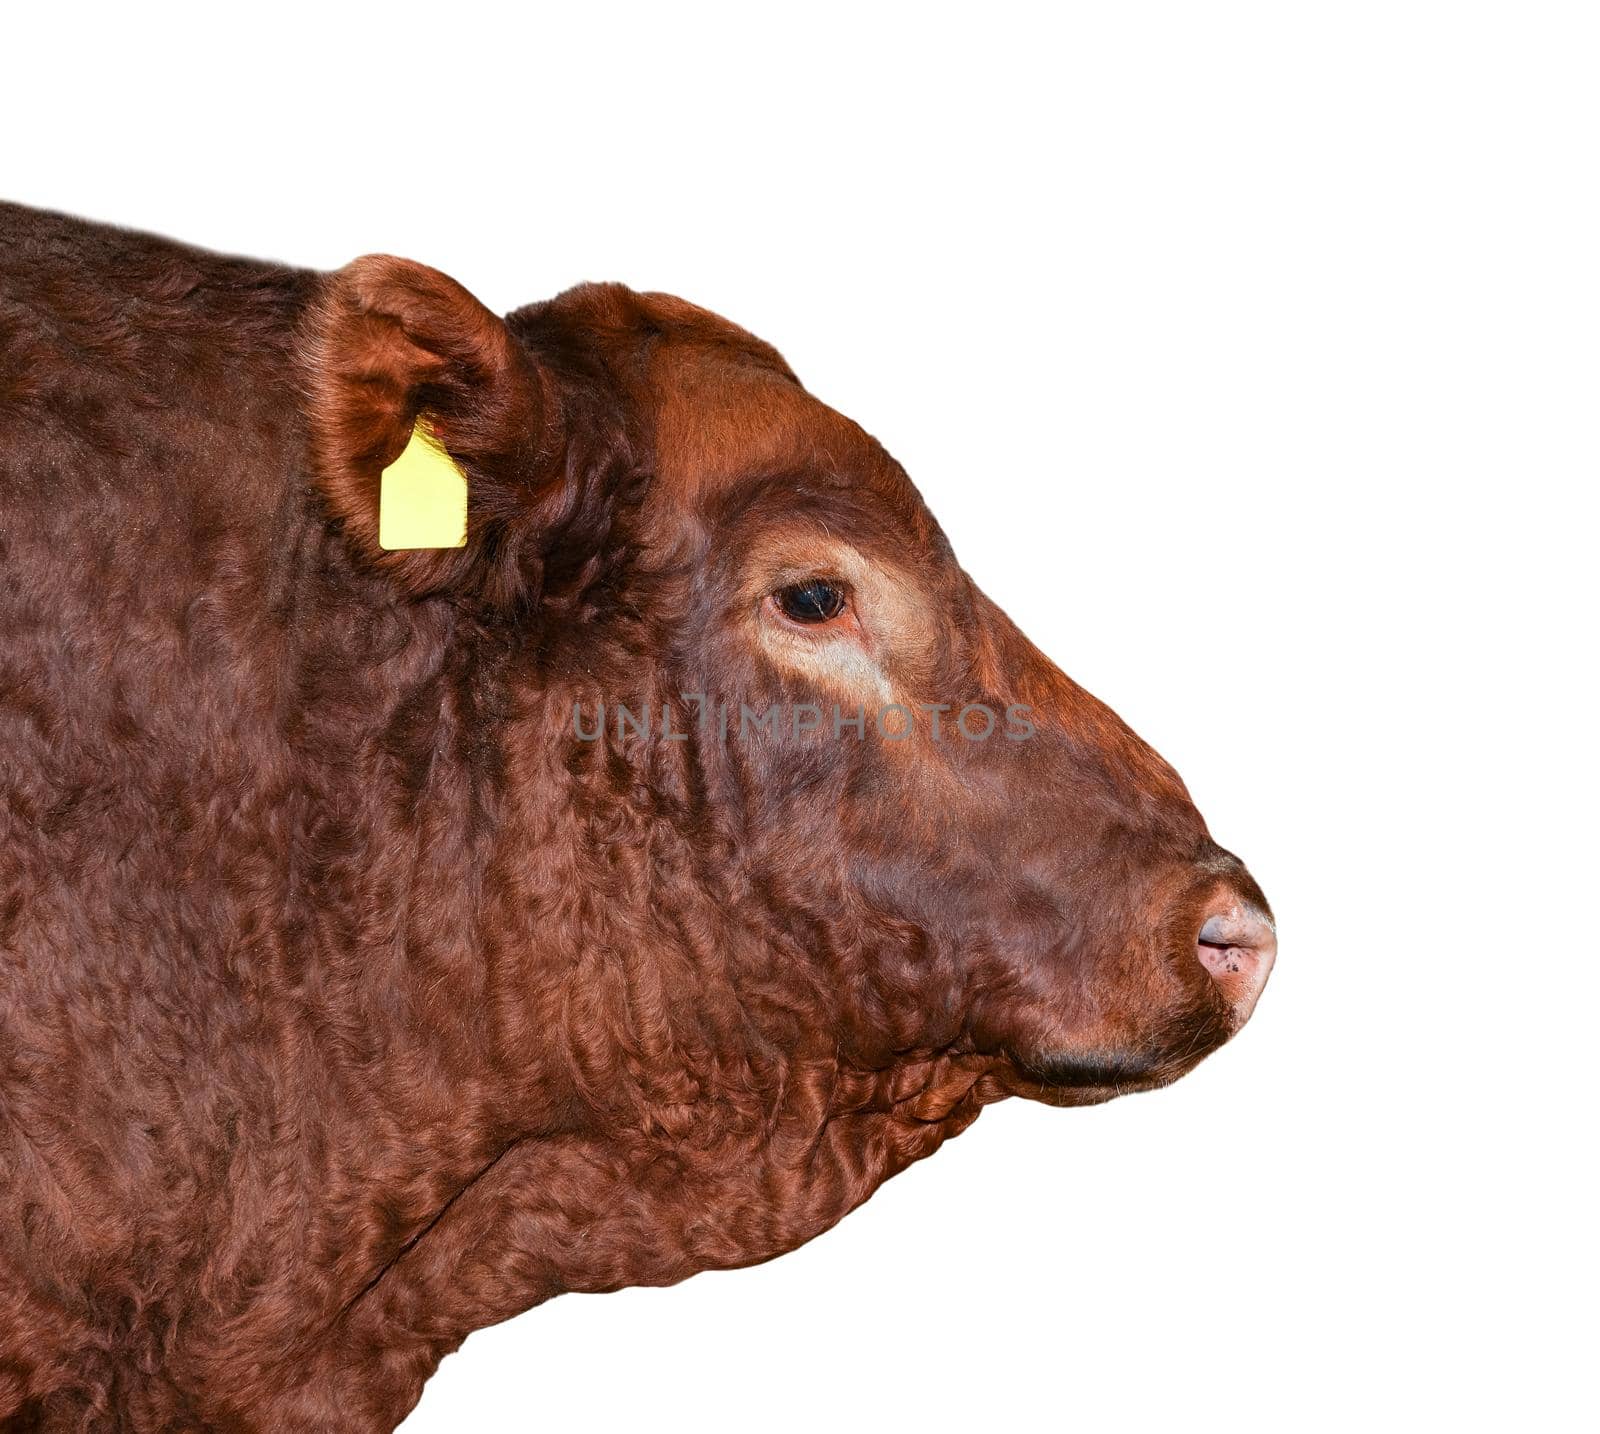 Bull isolated on white. Beautiful big brown bull portrait close up. Farm animals. Beef cattle isolated on white.